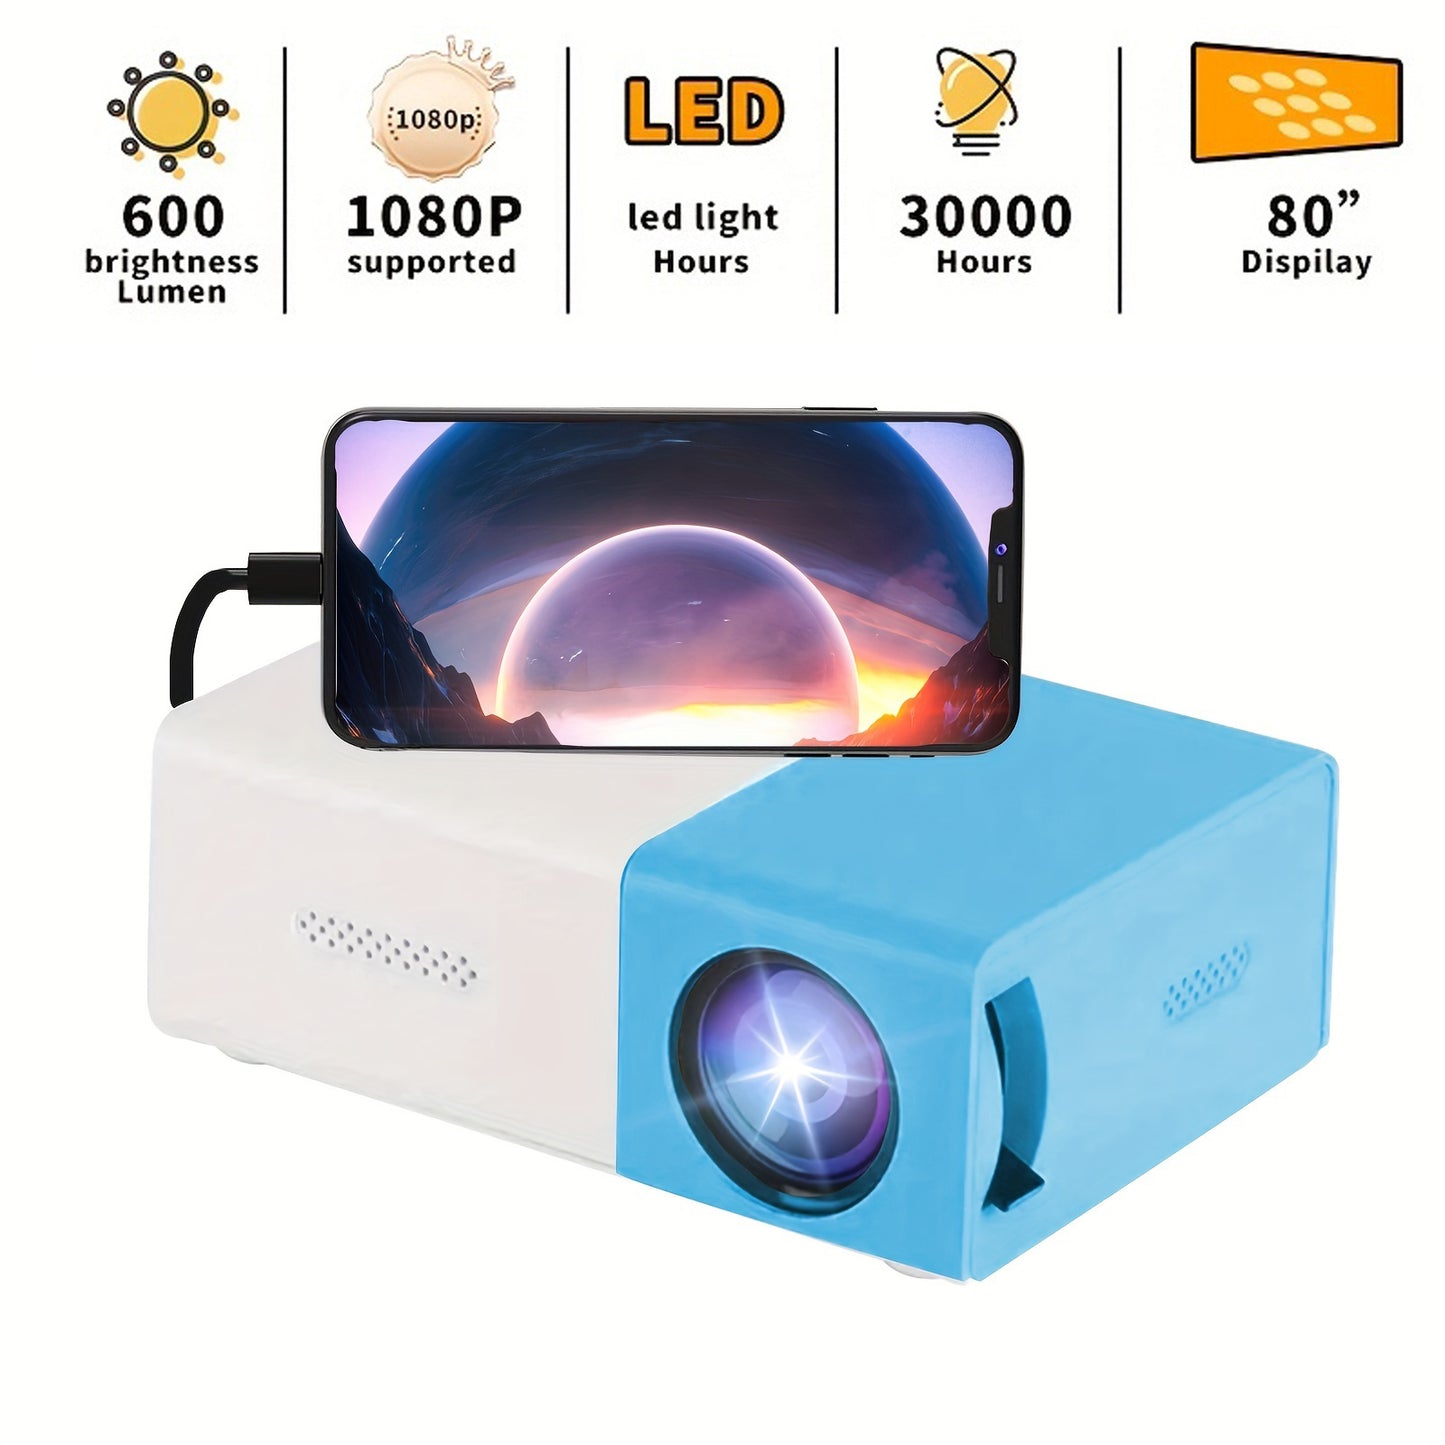 Mini Projector: Enhance Your Movie and Gaming Experience